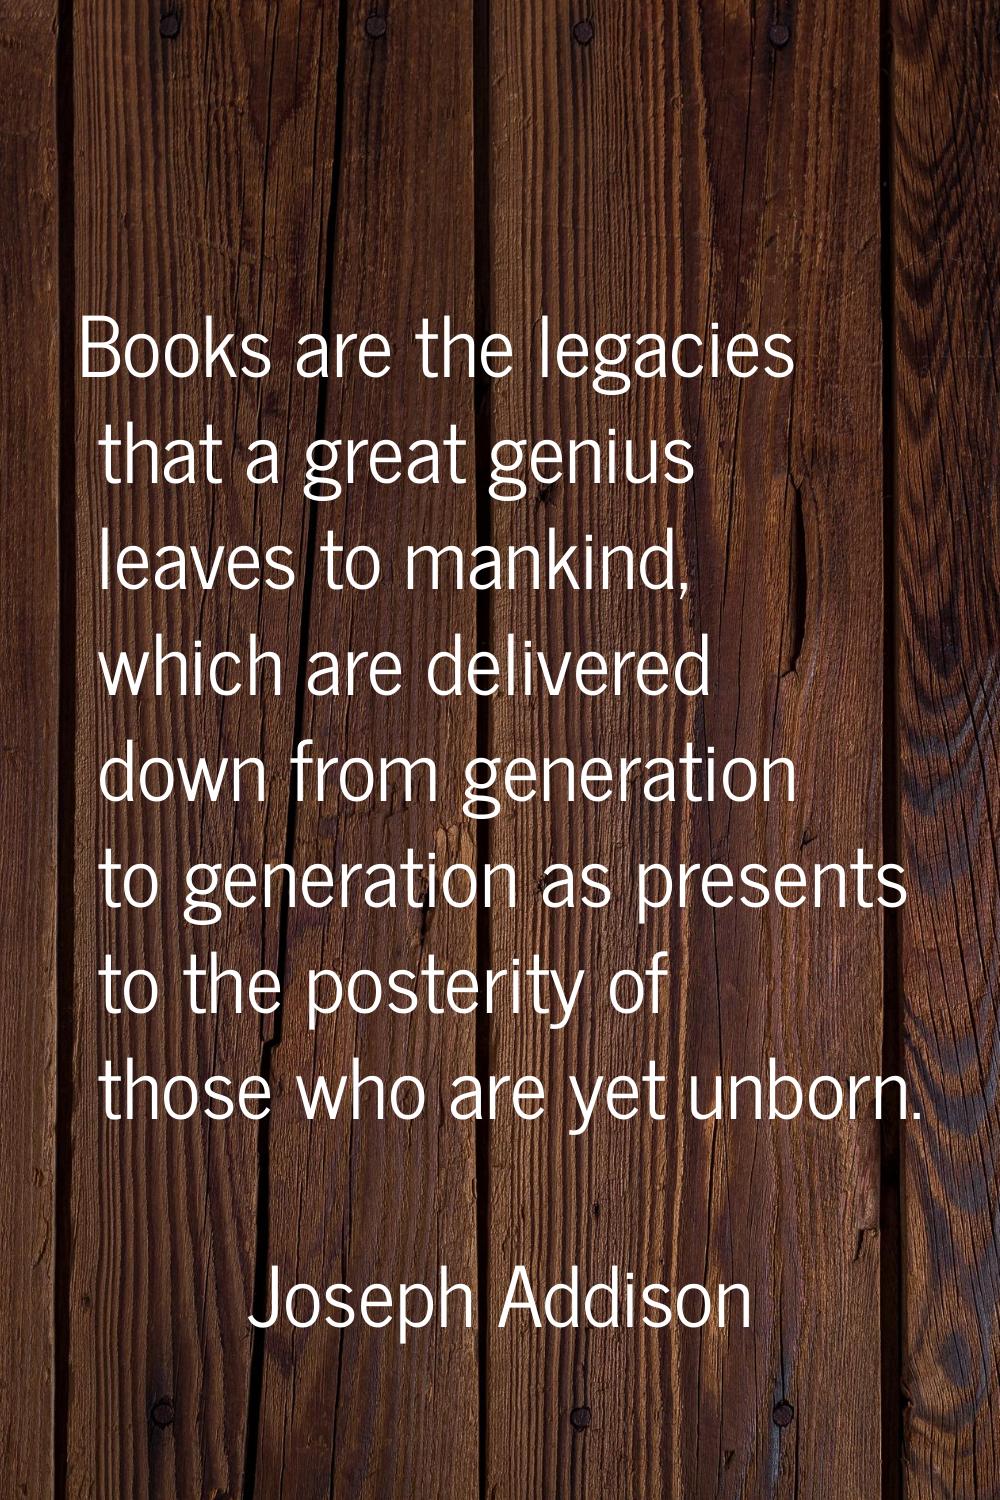 Books are the legacies that a great genius leaves to mankind, which are delivered down from generat